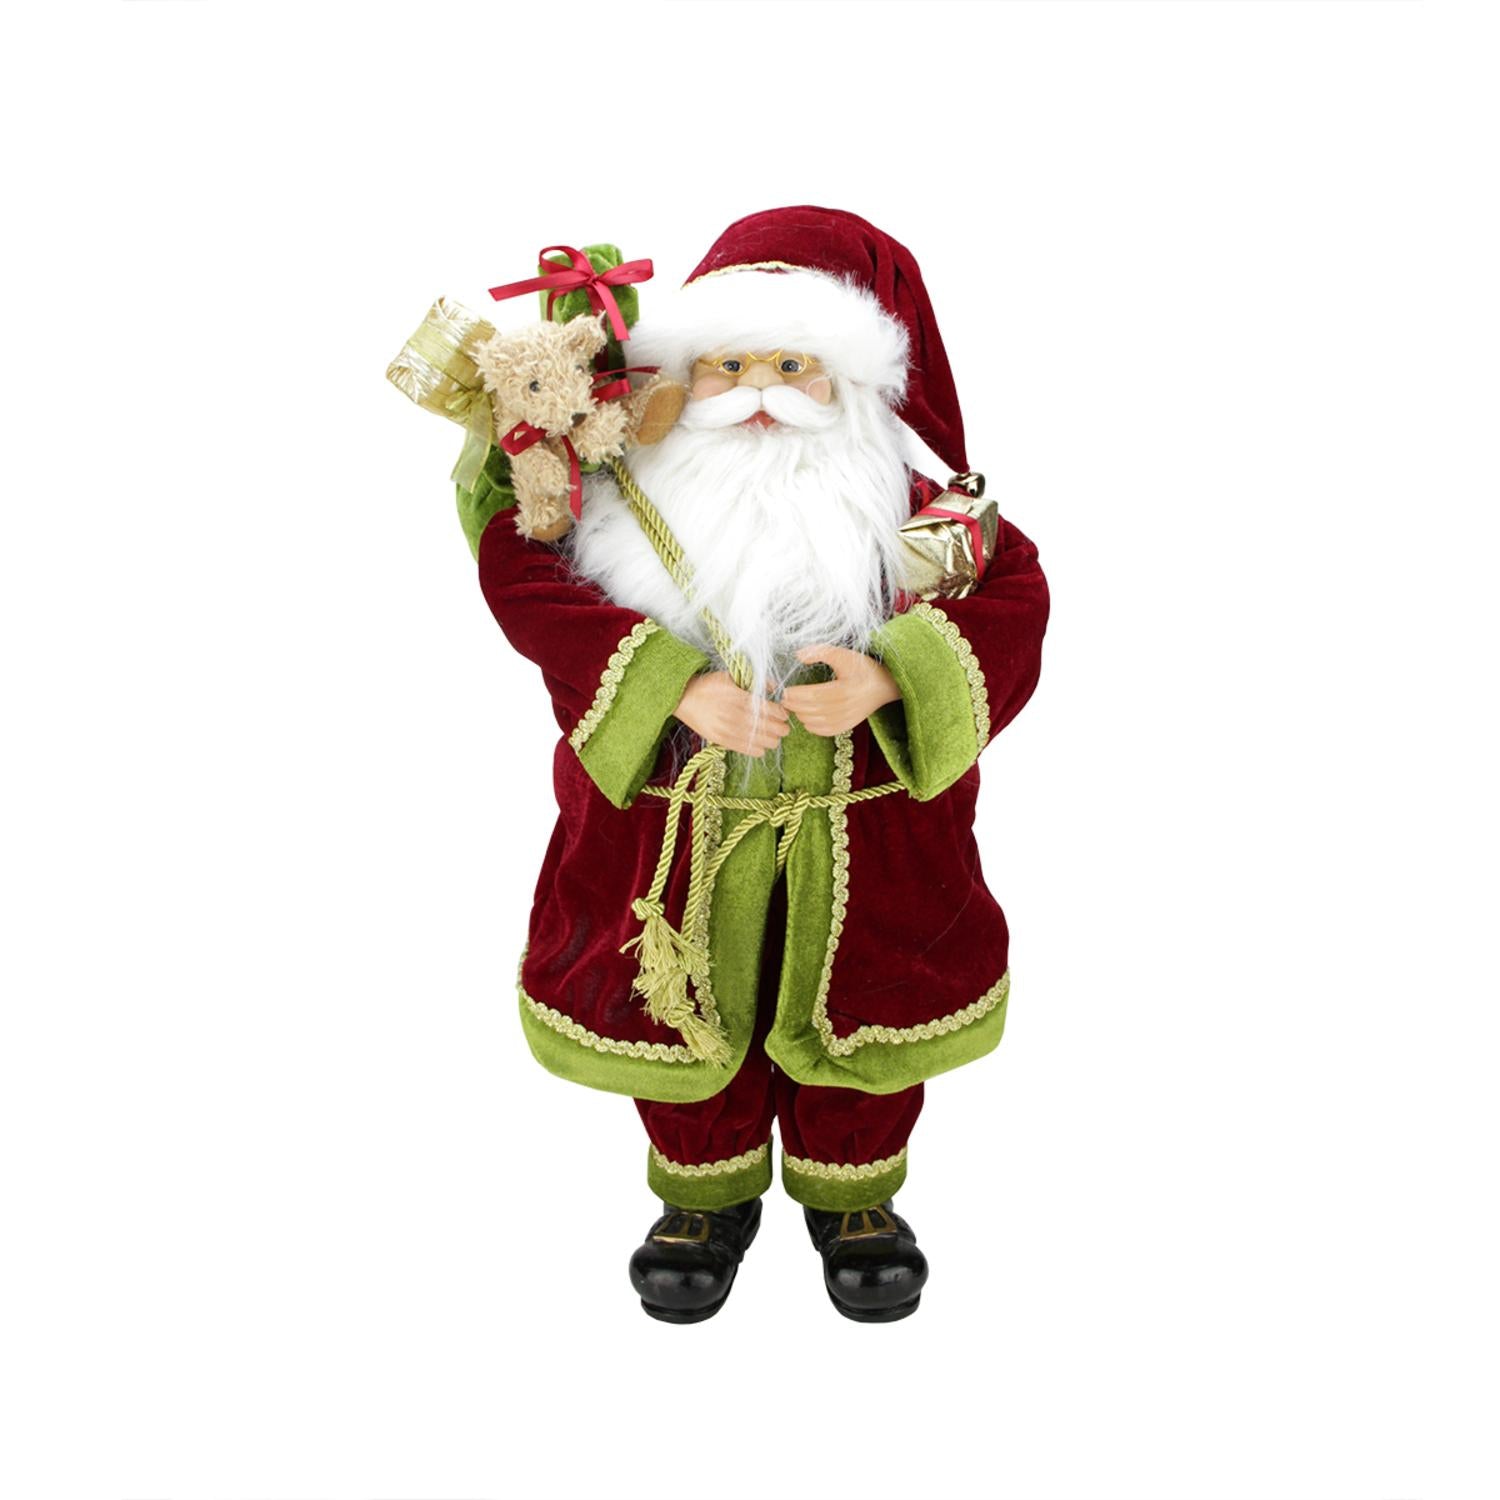 24 Inch Grand Imperial Red Green And Gold Standing Santa Claus Christmas Figure With Gift Bag